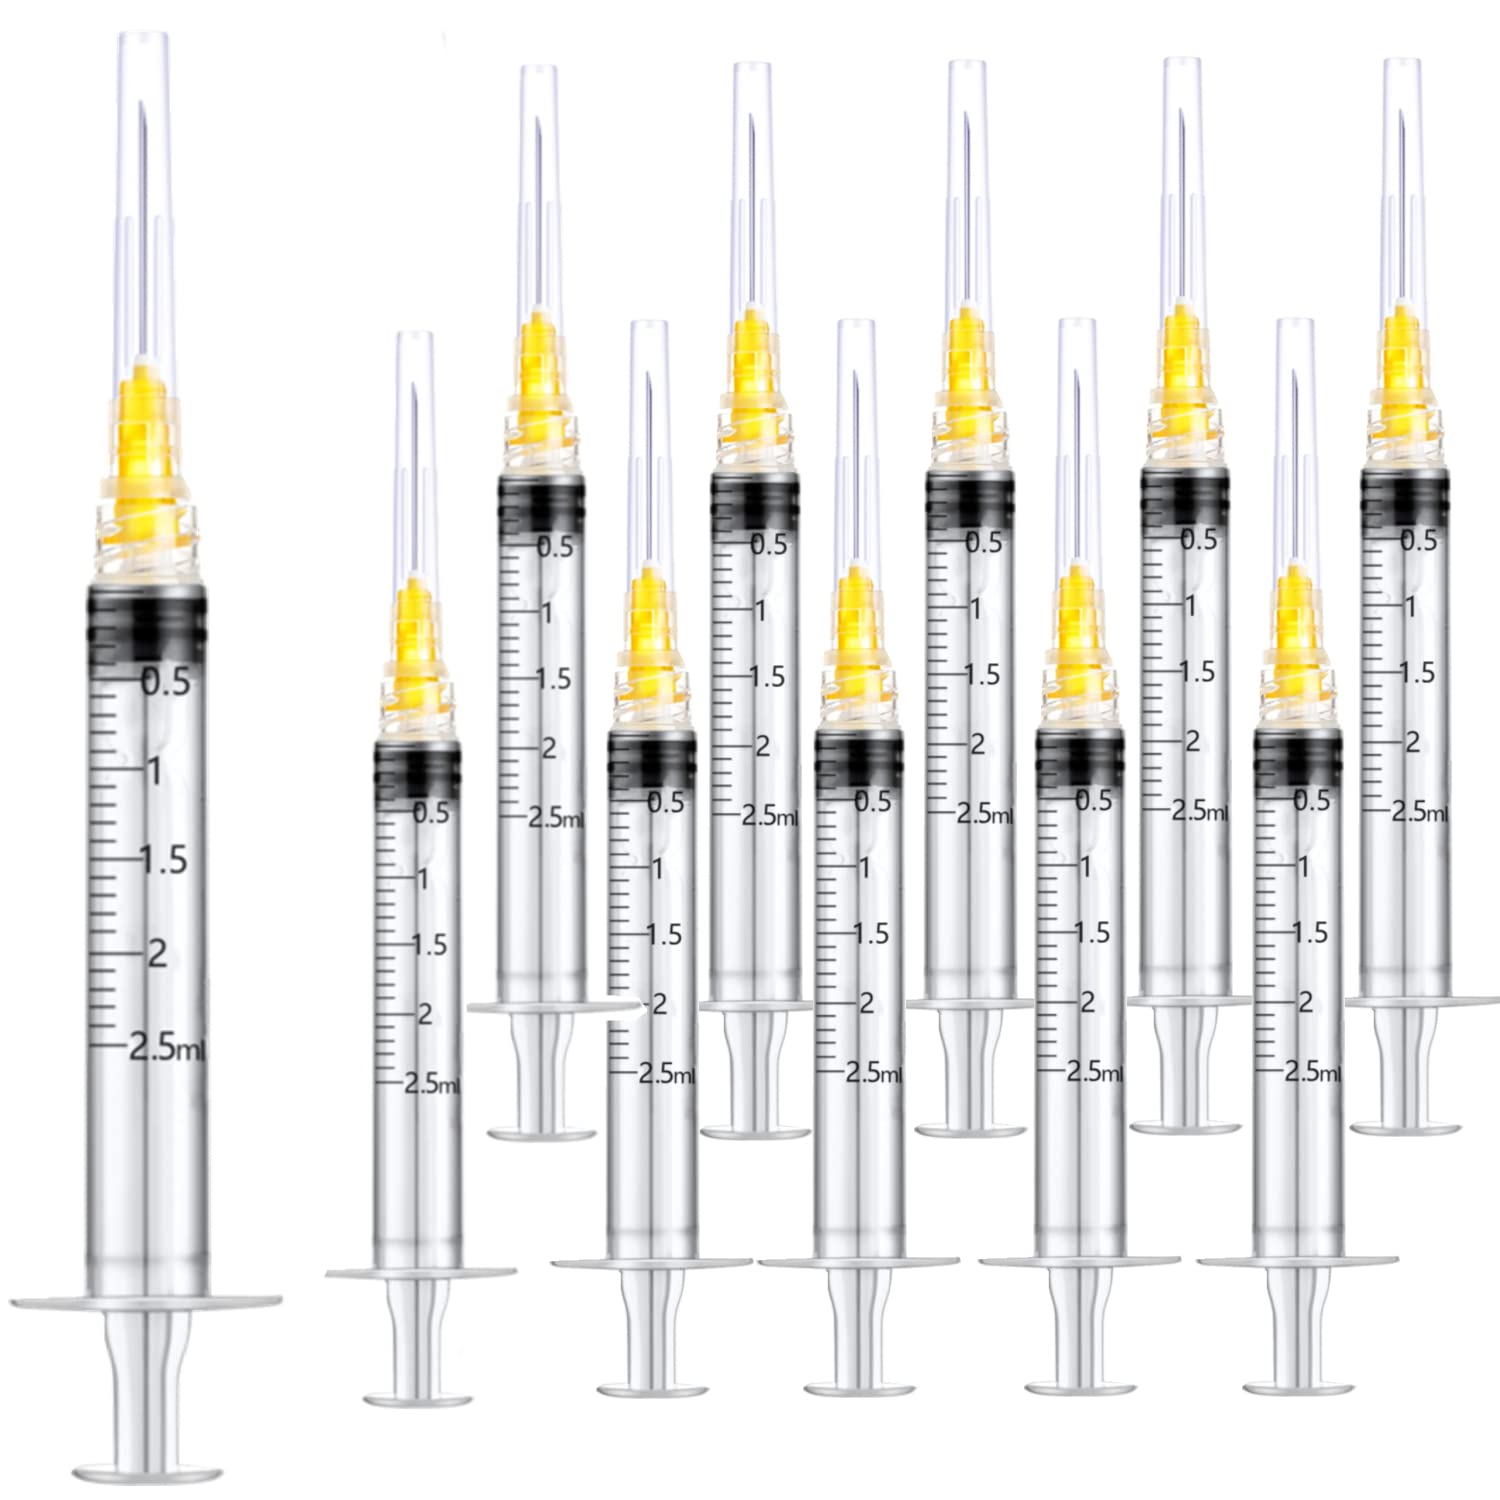 100 Pack 2.5ml 25Ga Plastic Syringe with Measurement for Scientific Labs and Industrial Dispensing, Disposable Individually Wrapped (100, 2.5ml-25Ga)